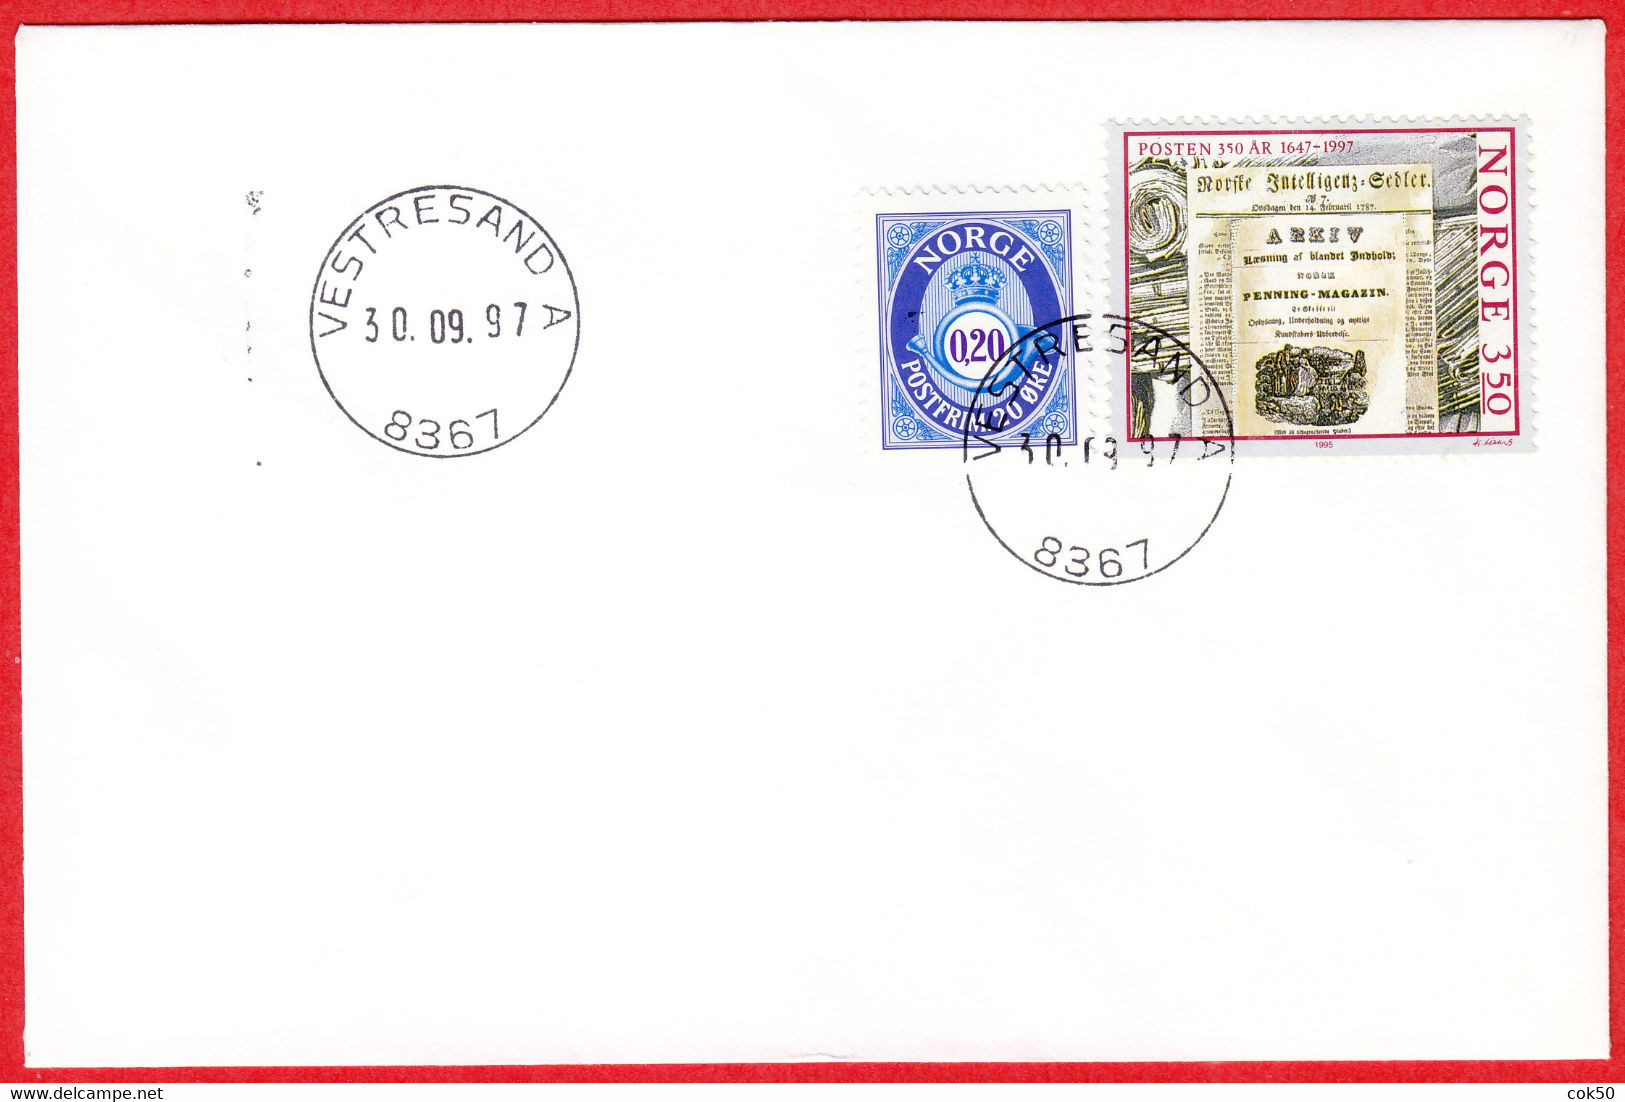 NORWAY -  8367 VESTRESAND A - 24 MmØ - (Nordland County) - Last Day/postoffice Closed On 1997.09.30 - Emisiones Locales